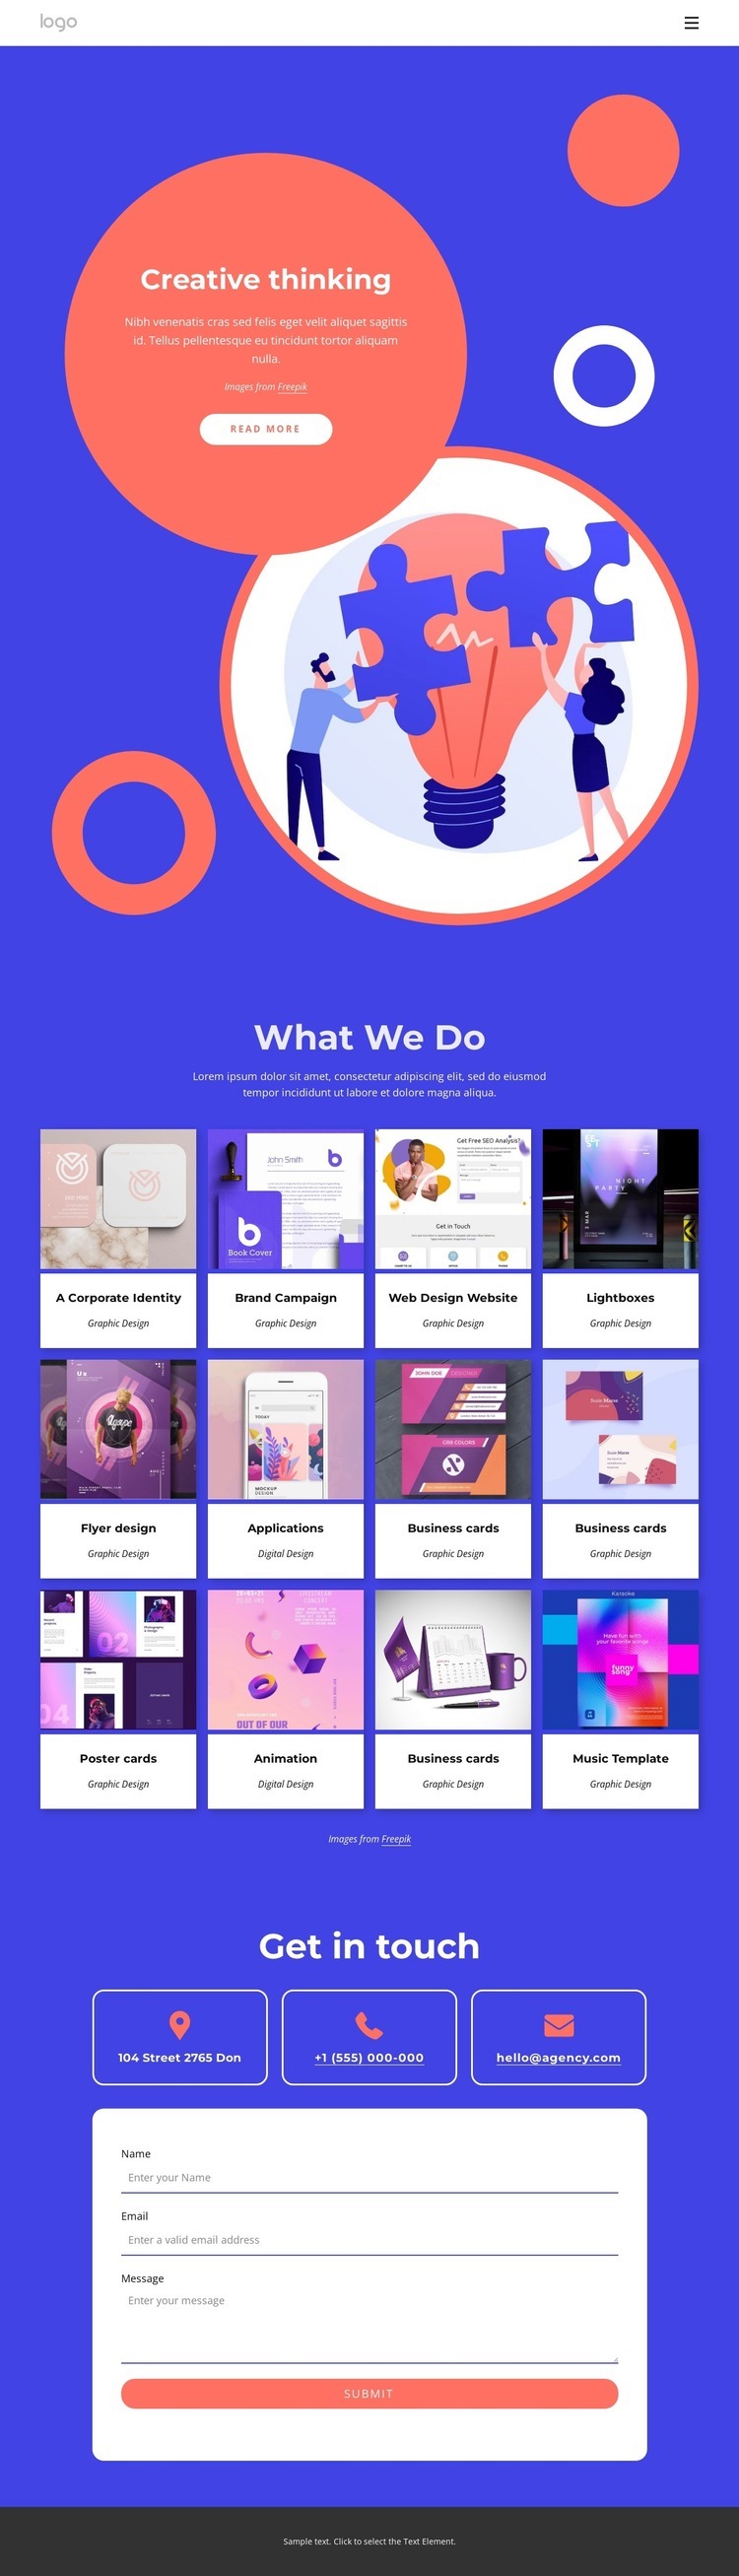 Campaigns, mobile and digital Homepage Design